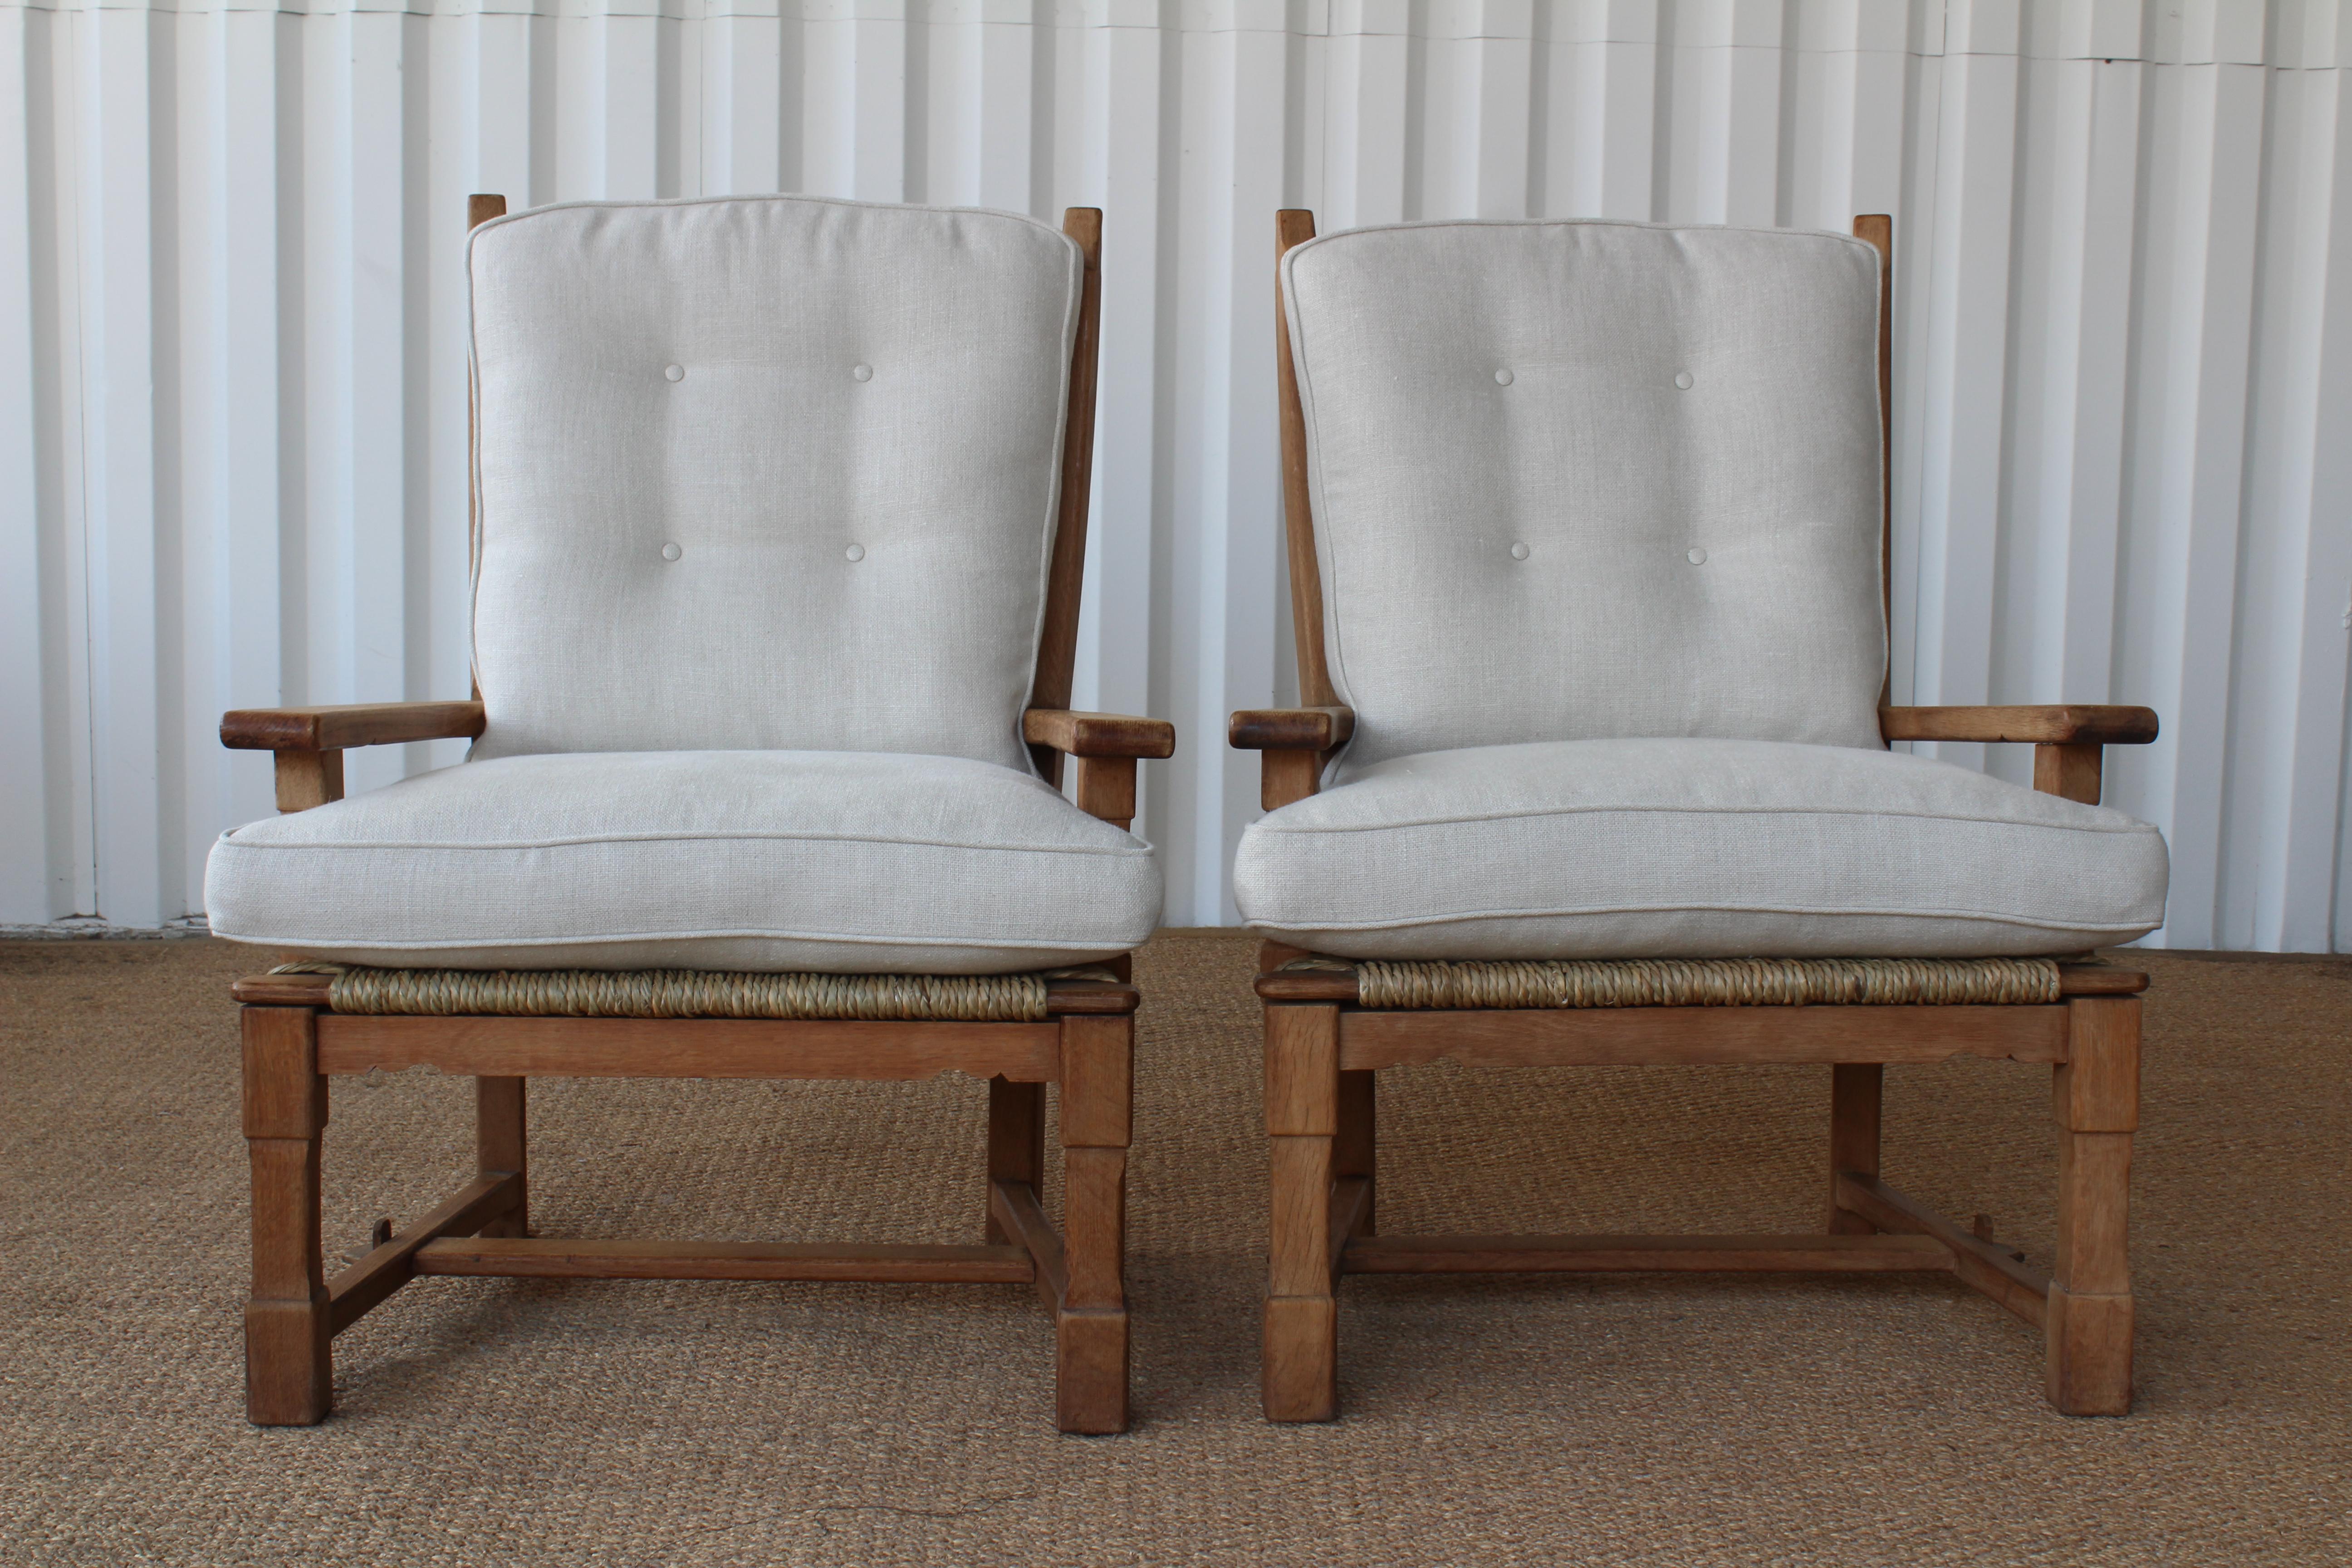 Pair of oak chairs with new seagrass detailing along bottom seat. New straps and new cushions upholstered in an off white Belgian linen. Sold as a pair.